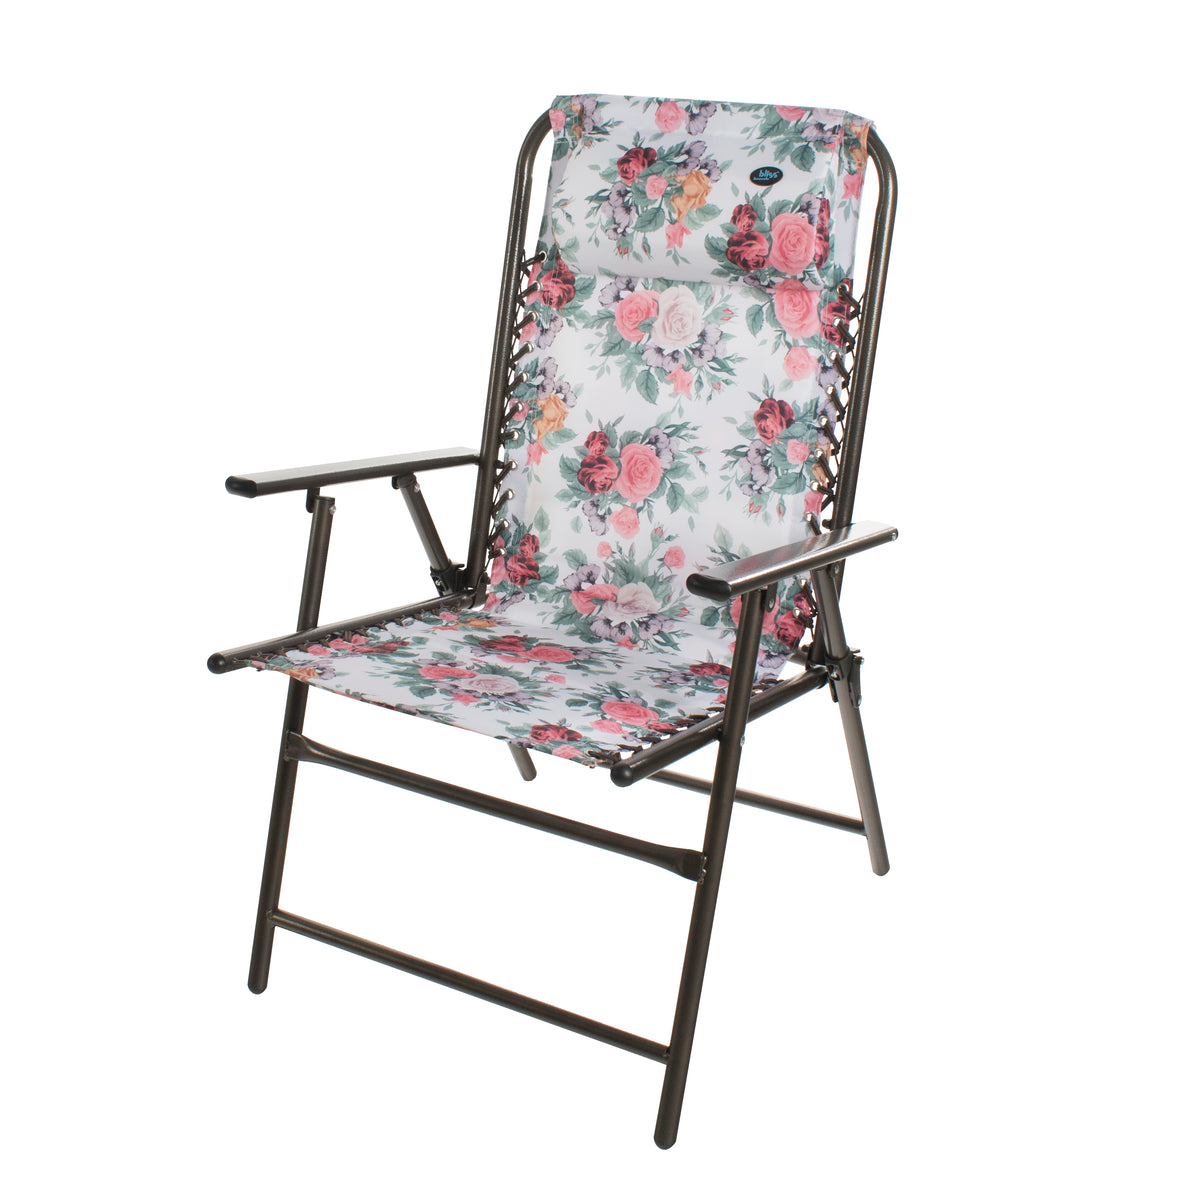 Bliss Hammocks 18-inch Wide Folding Patio Chair with Pillow in a pretty floral design.